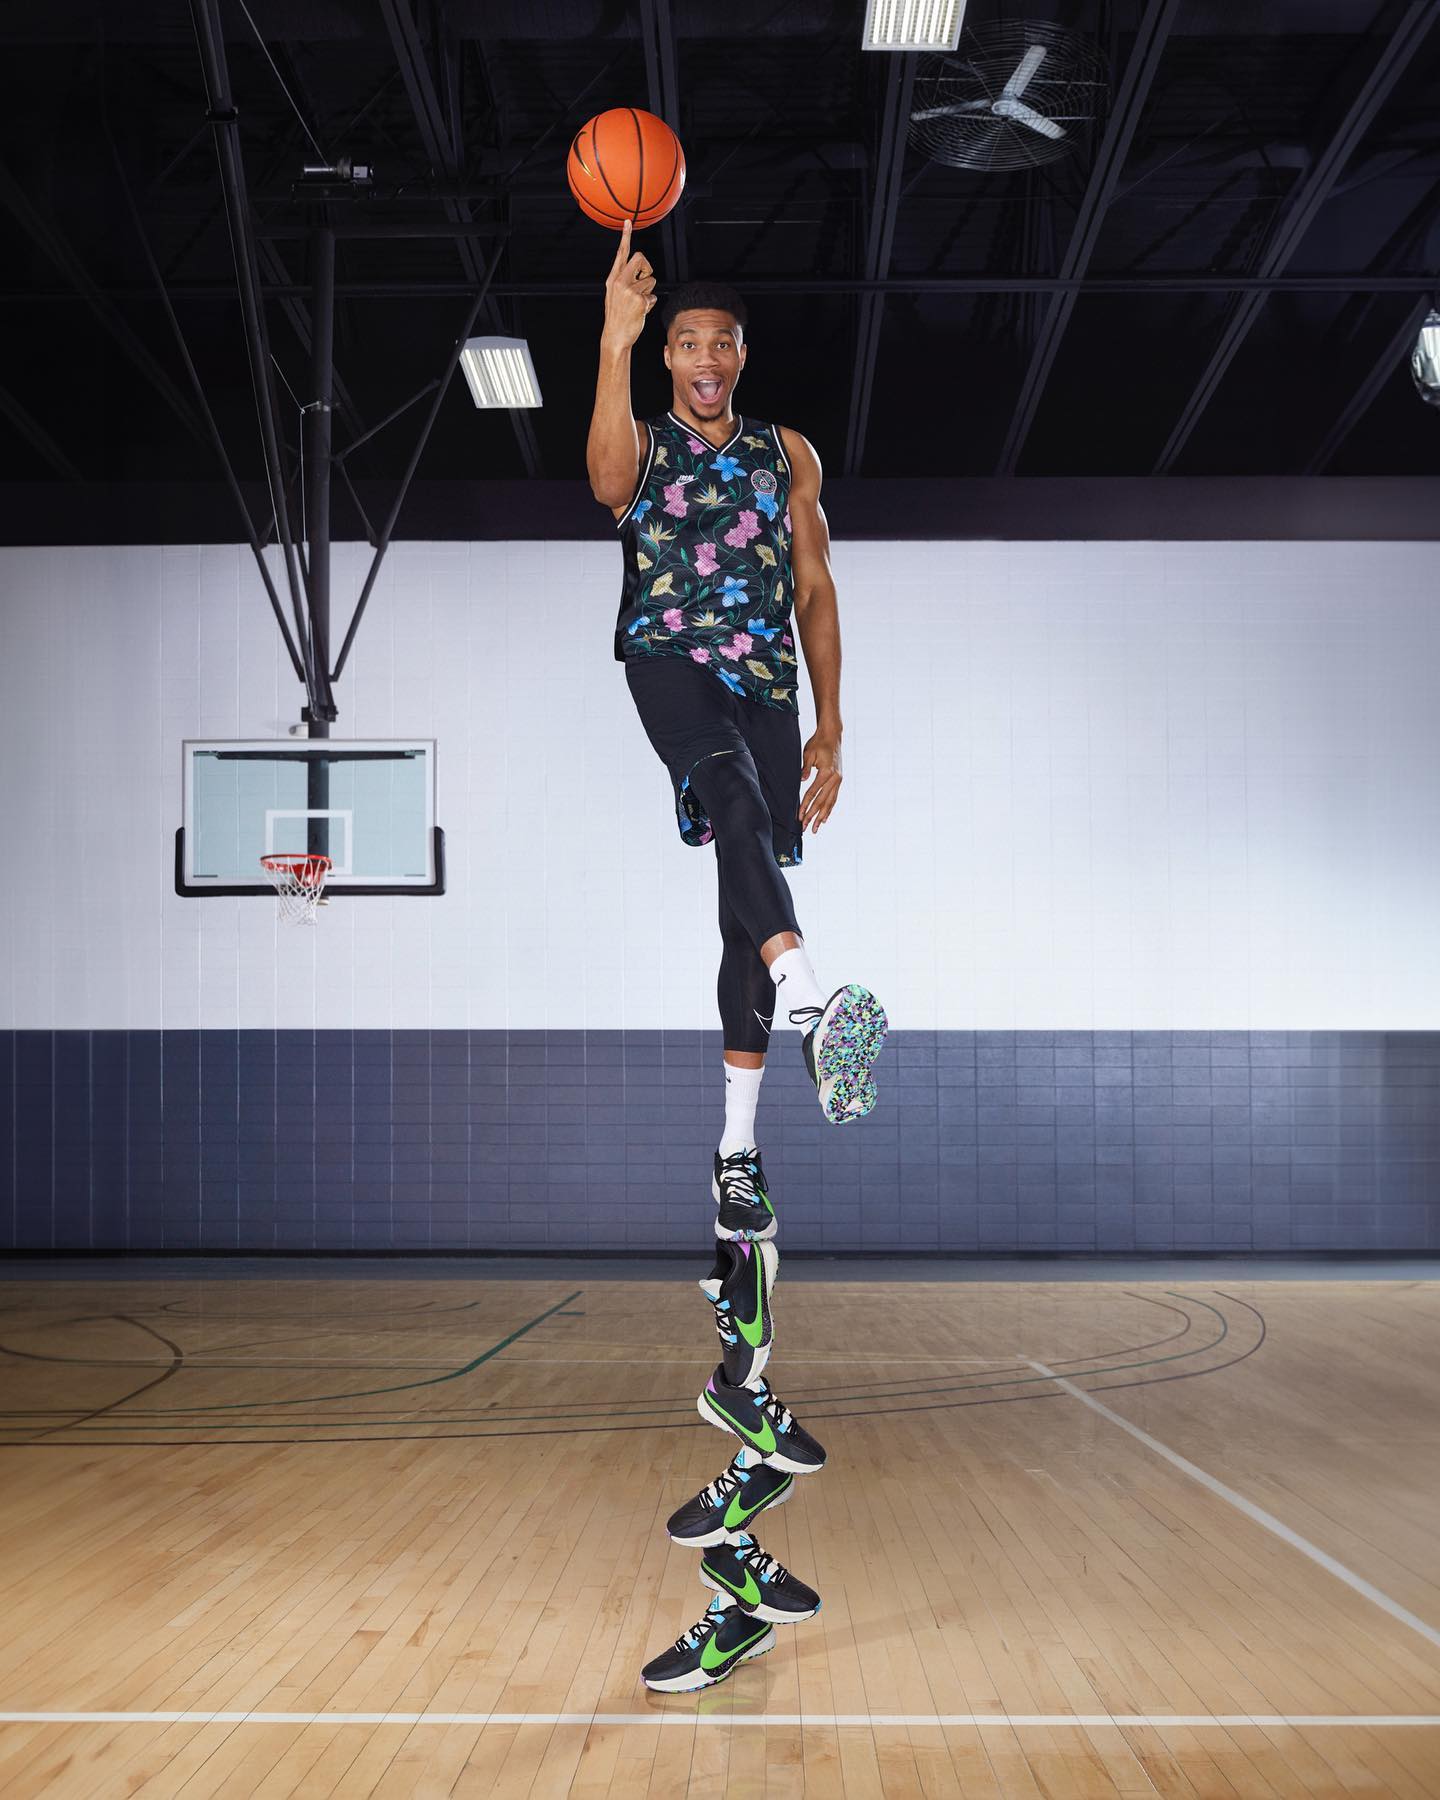 Antetokounmpo's business ventures saw him launch his own shoe line, the Zoom Freak, in partnership with Nike